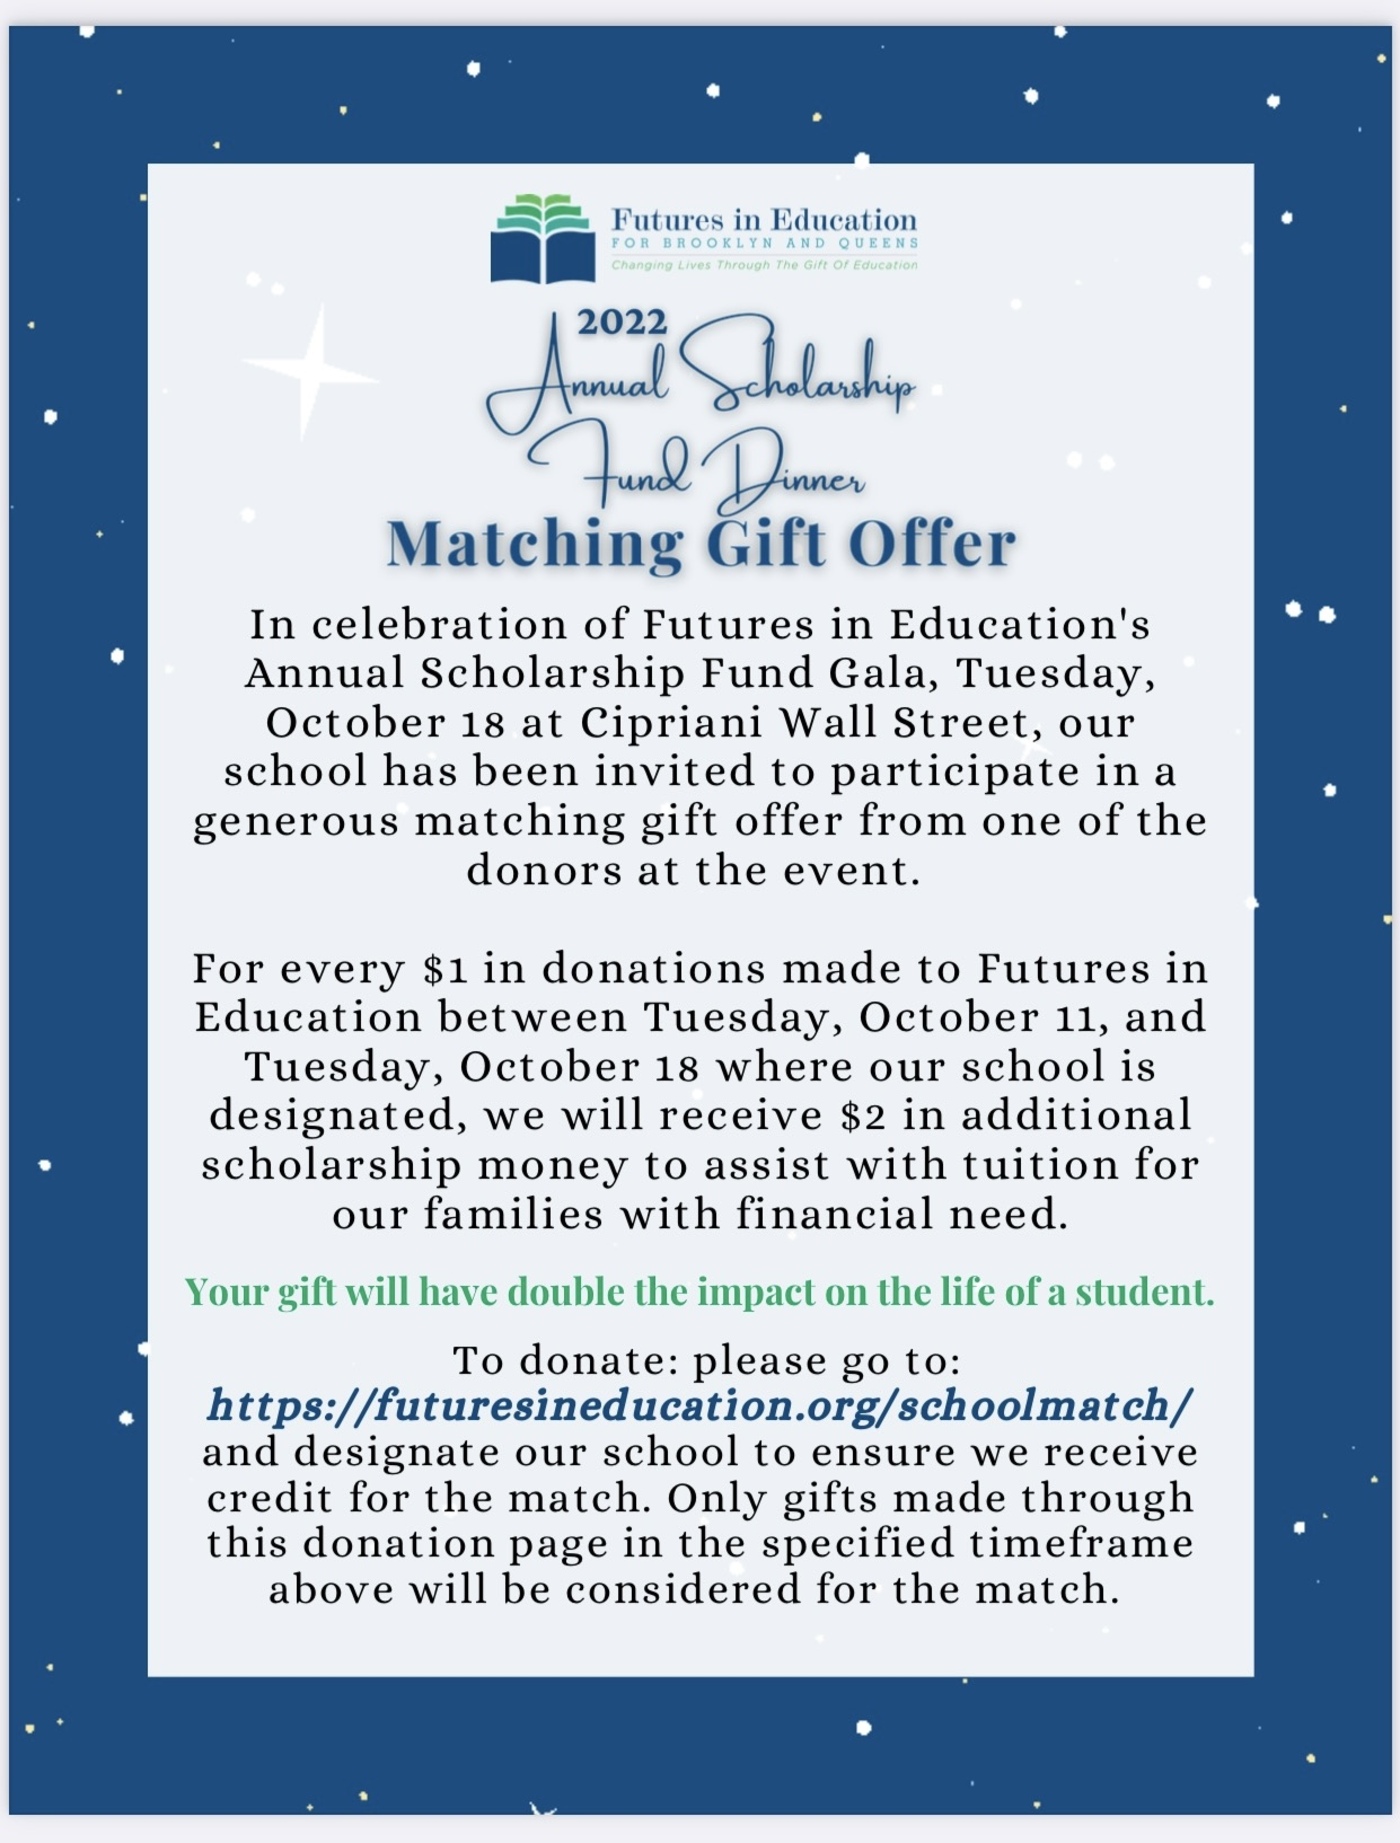 Futures in Education matching gift offer